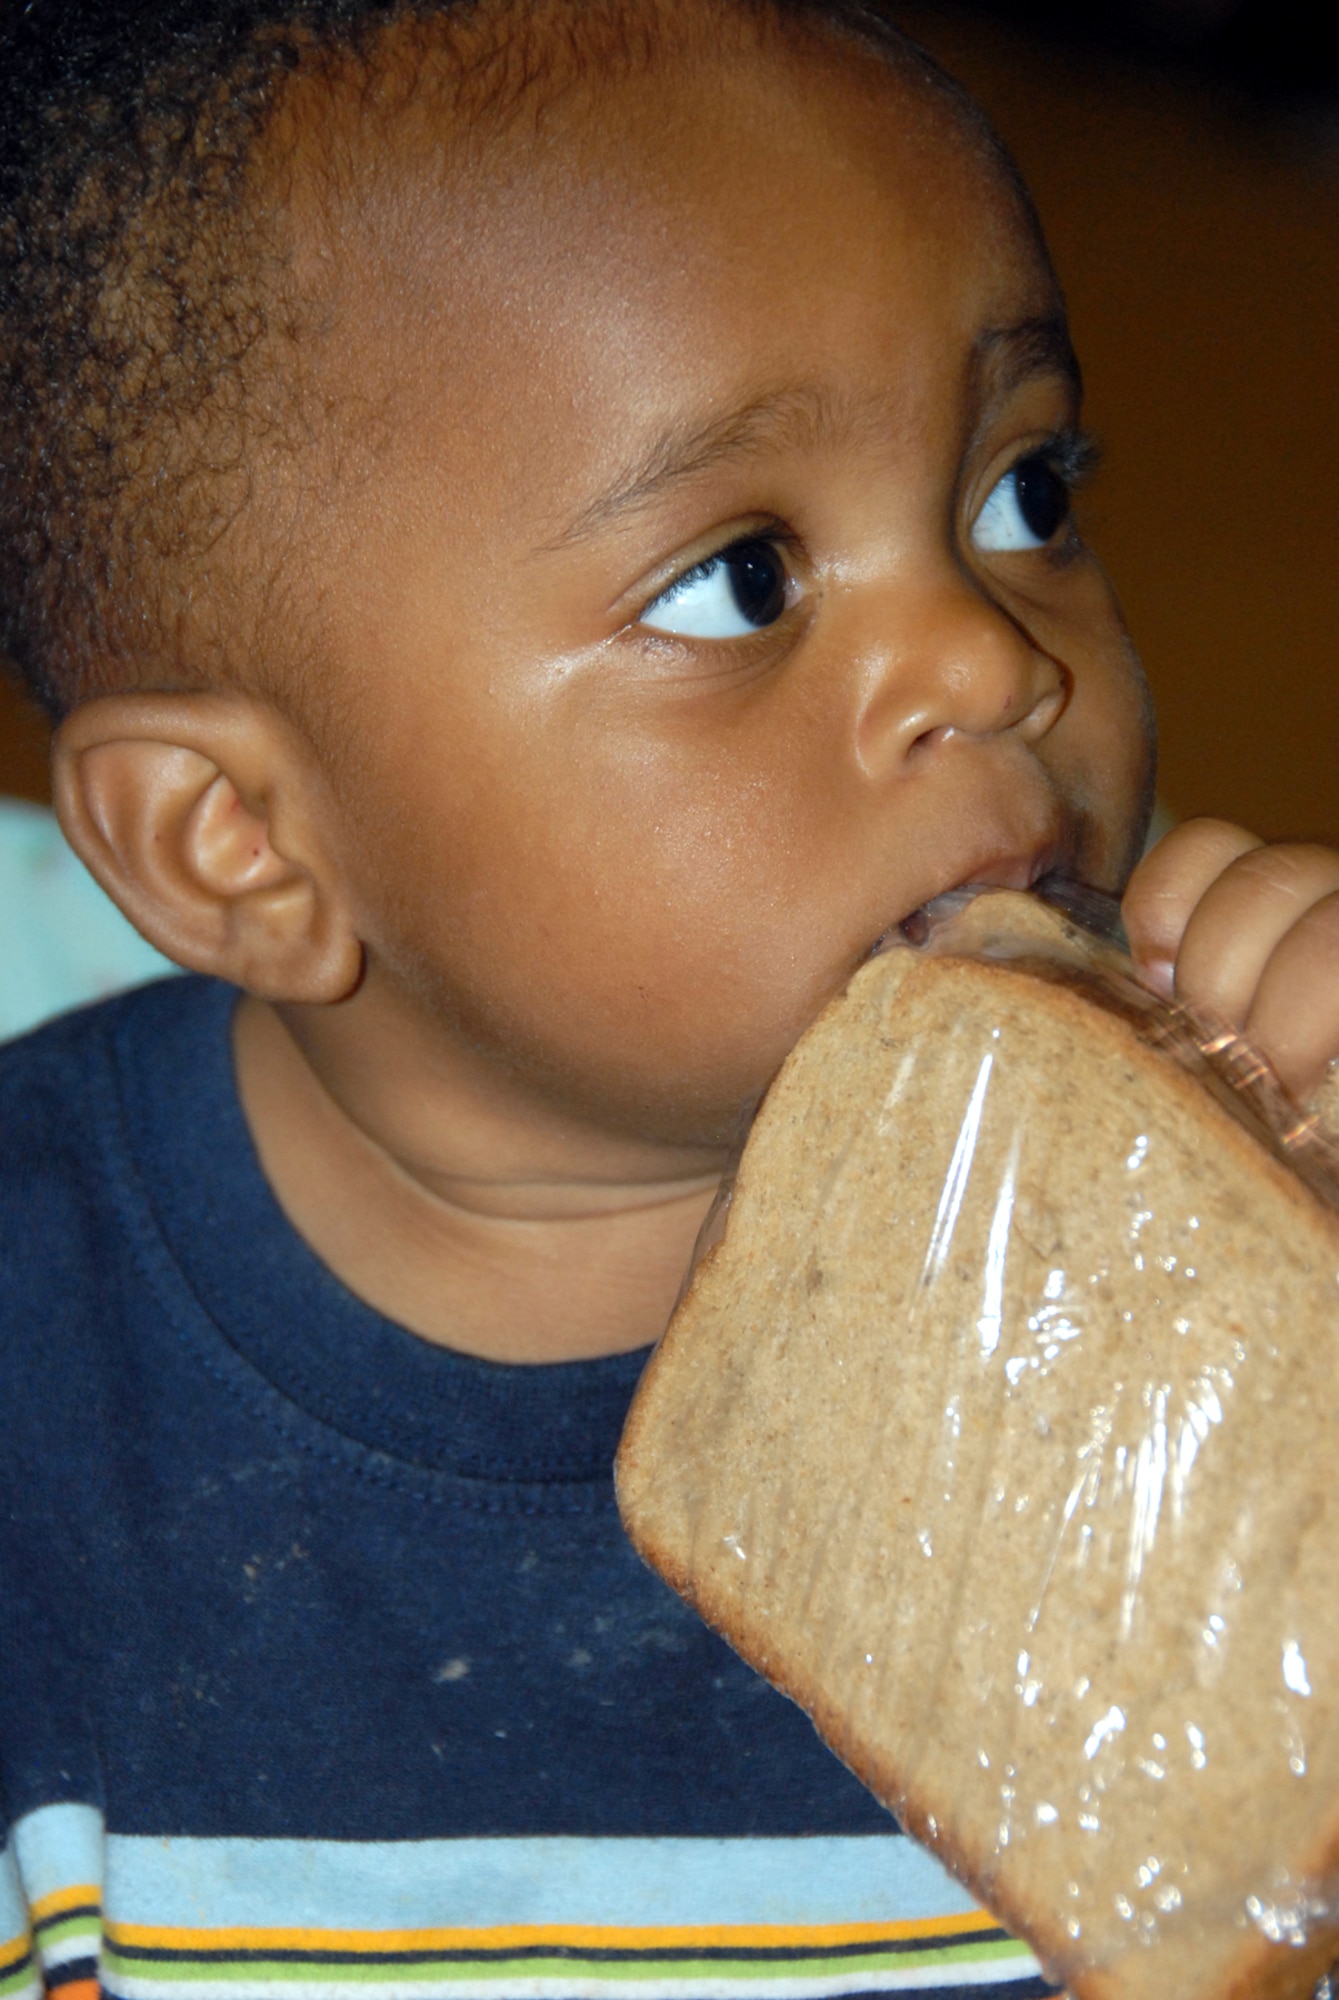 A young Haitian boy uses a sandwich from a box lunch as a toy. The meal was prepared by the 482nd Services Sqaudron, Homestead Air Reserve Base, Fla. The 482nd is preparing 500-800 box lunches a day in support of Operation Unified Response. (Air Force photo/Master Sgt. Chance Babin)